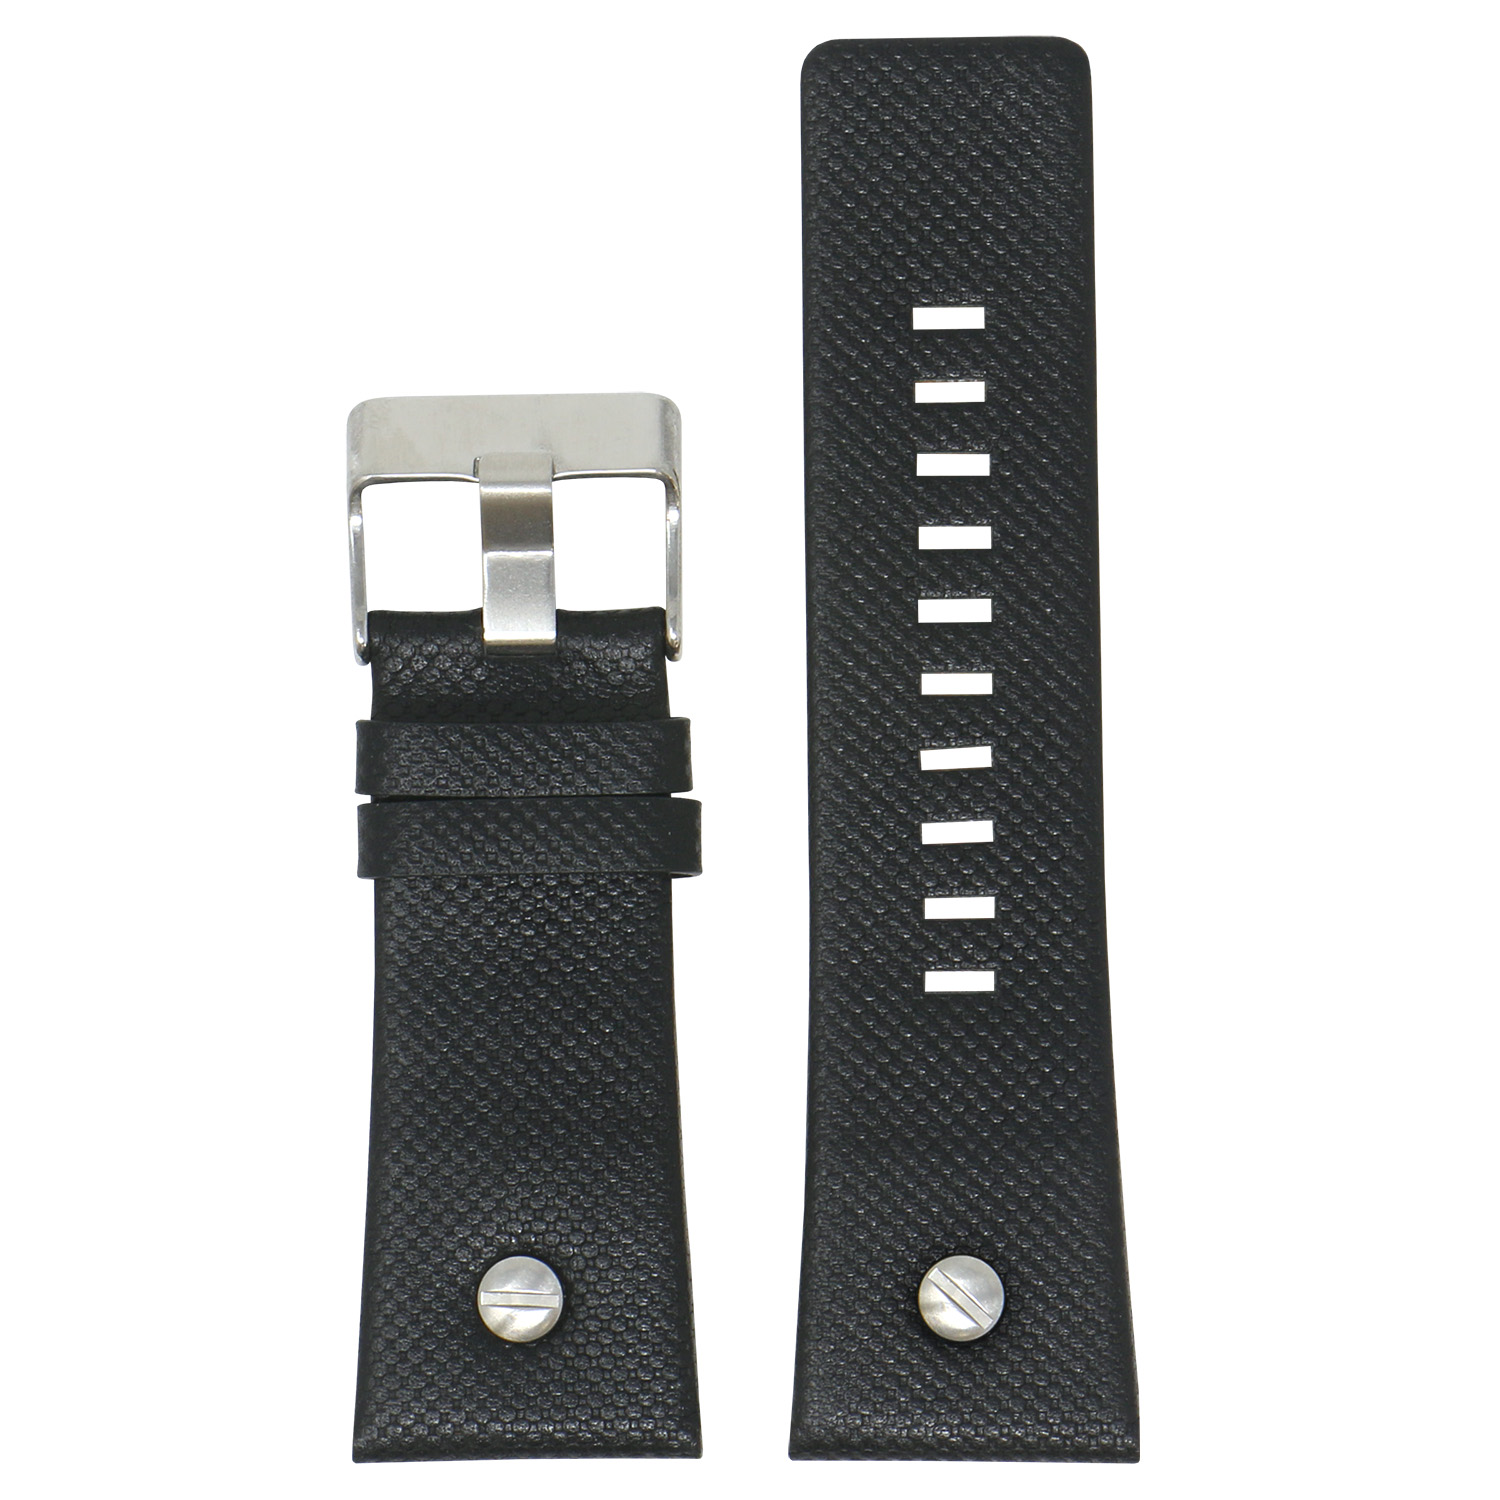 L.dz3.1 Main Black (Silver Buckle) StrapsCo Embossed Leather Watch Band Strap With Rivet For Diesel